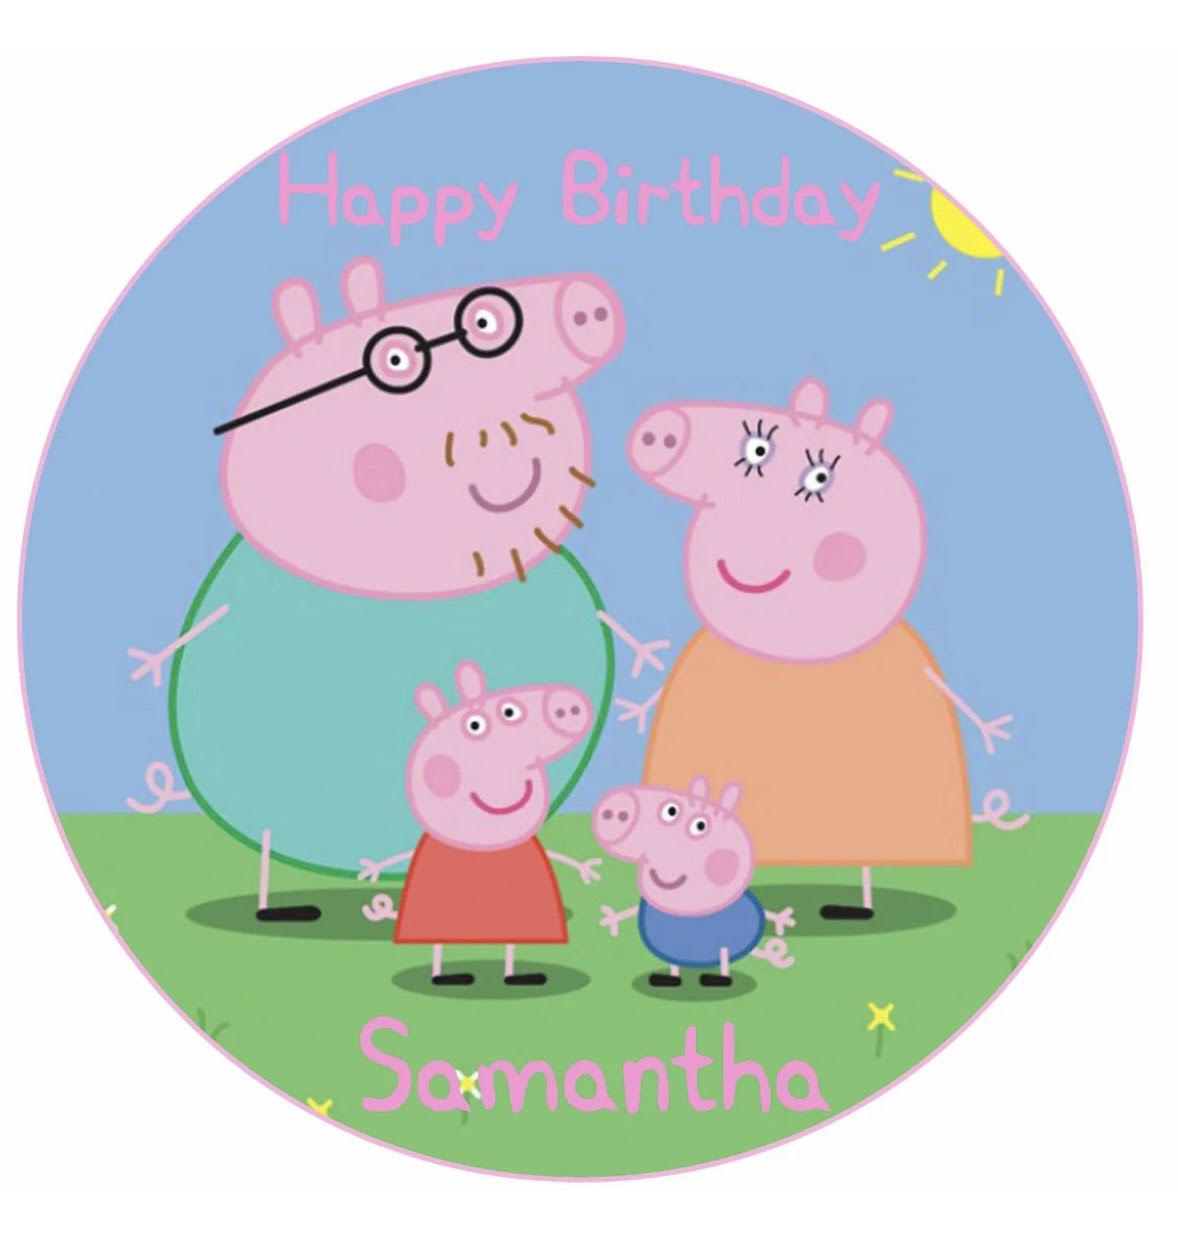 Peppa Pig Round Cake Edible Icing Image Topper 19cm